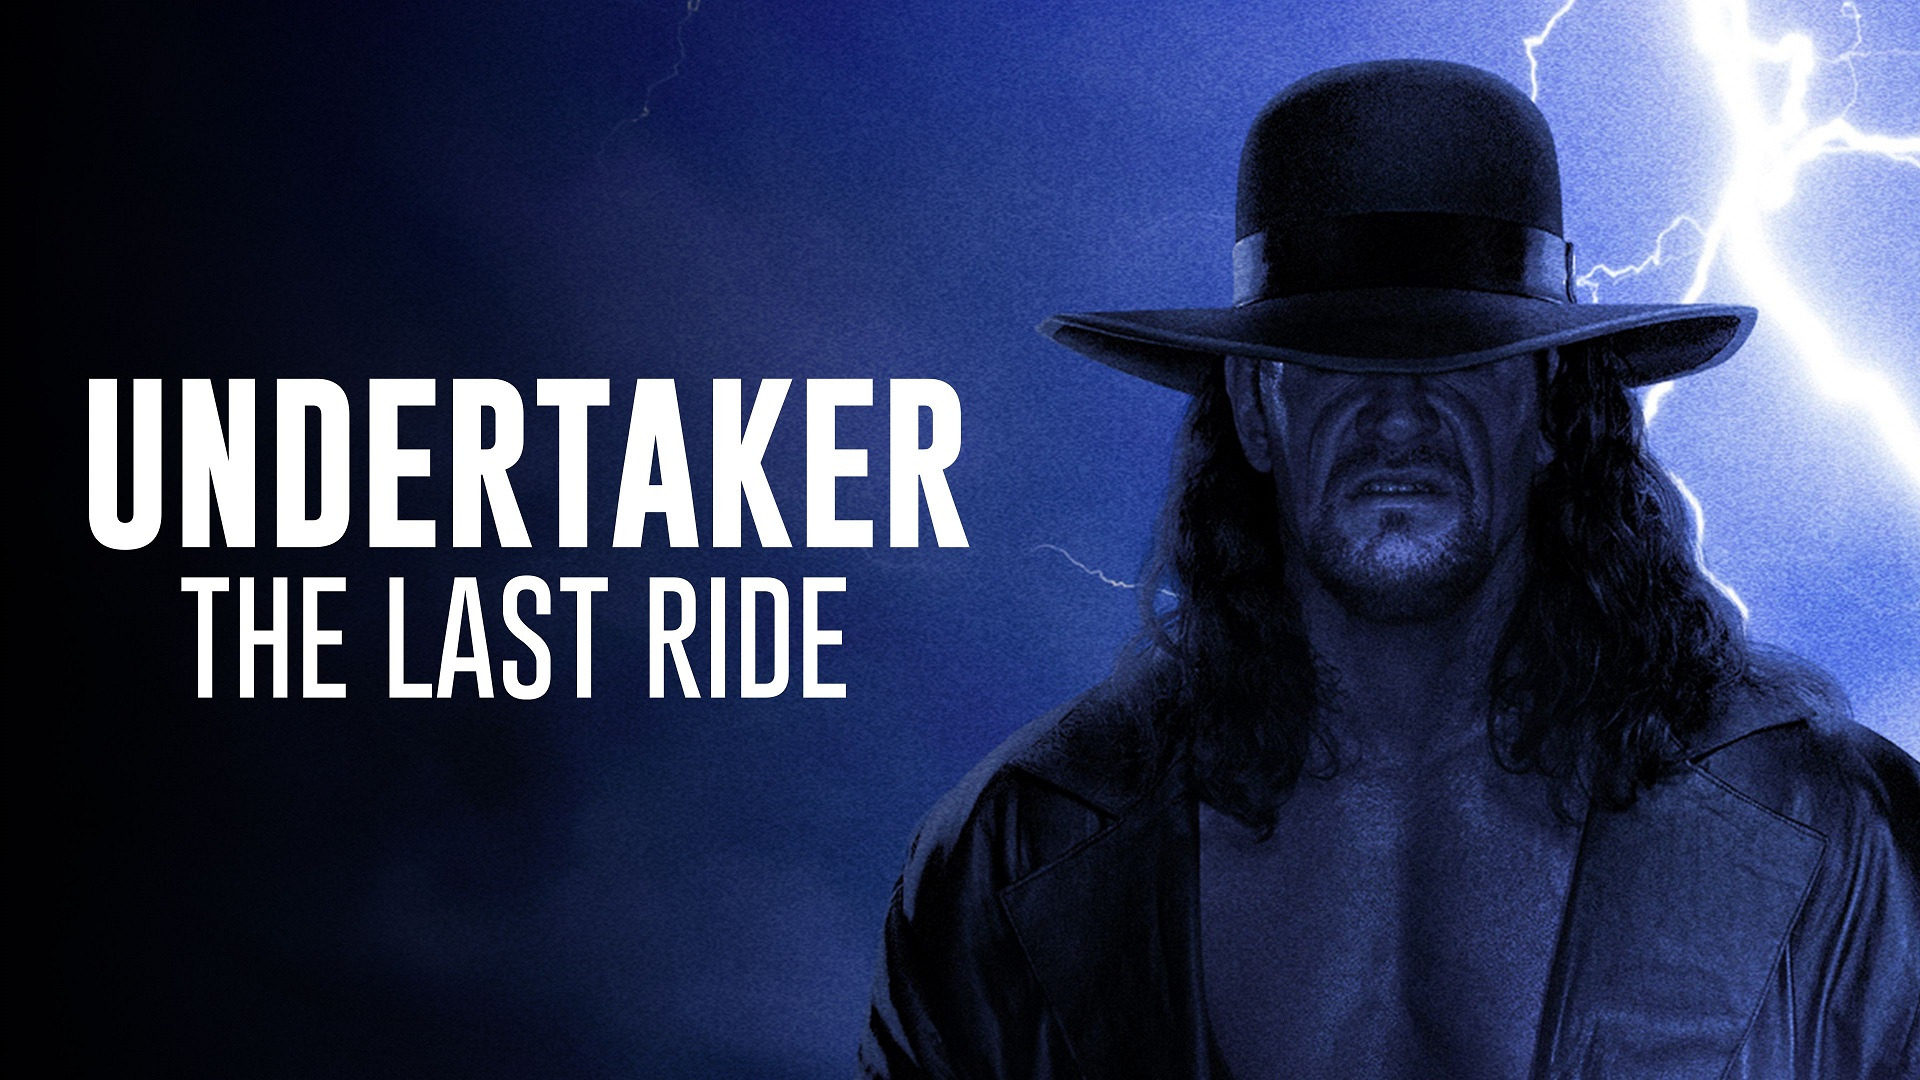 Show Undertaker: The Last Ride